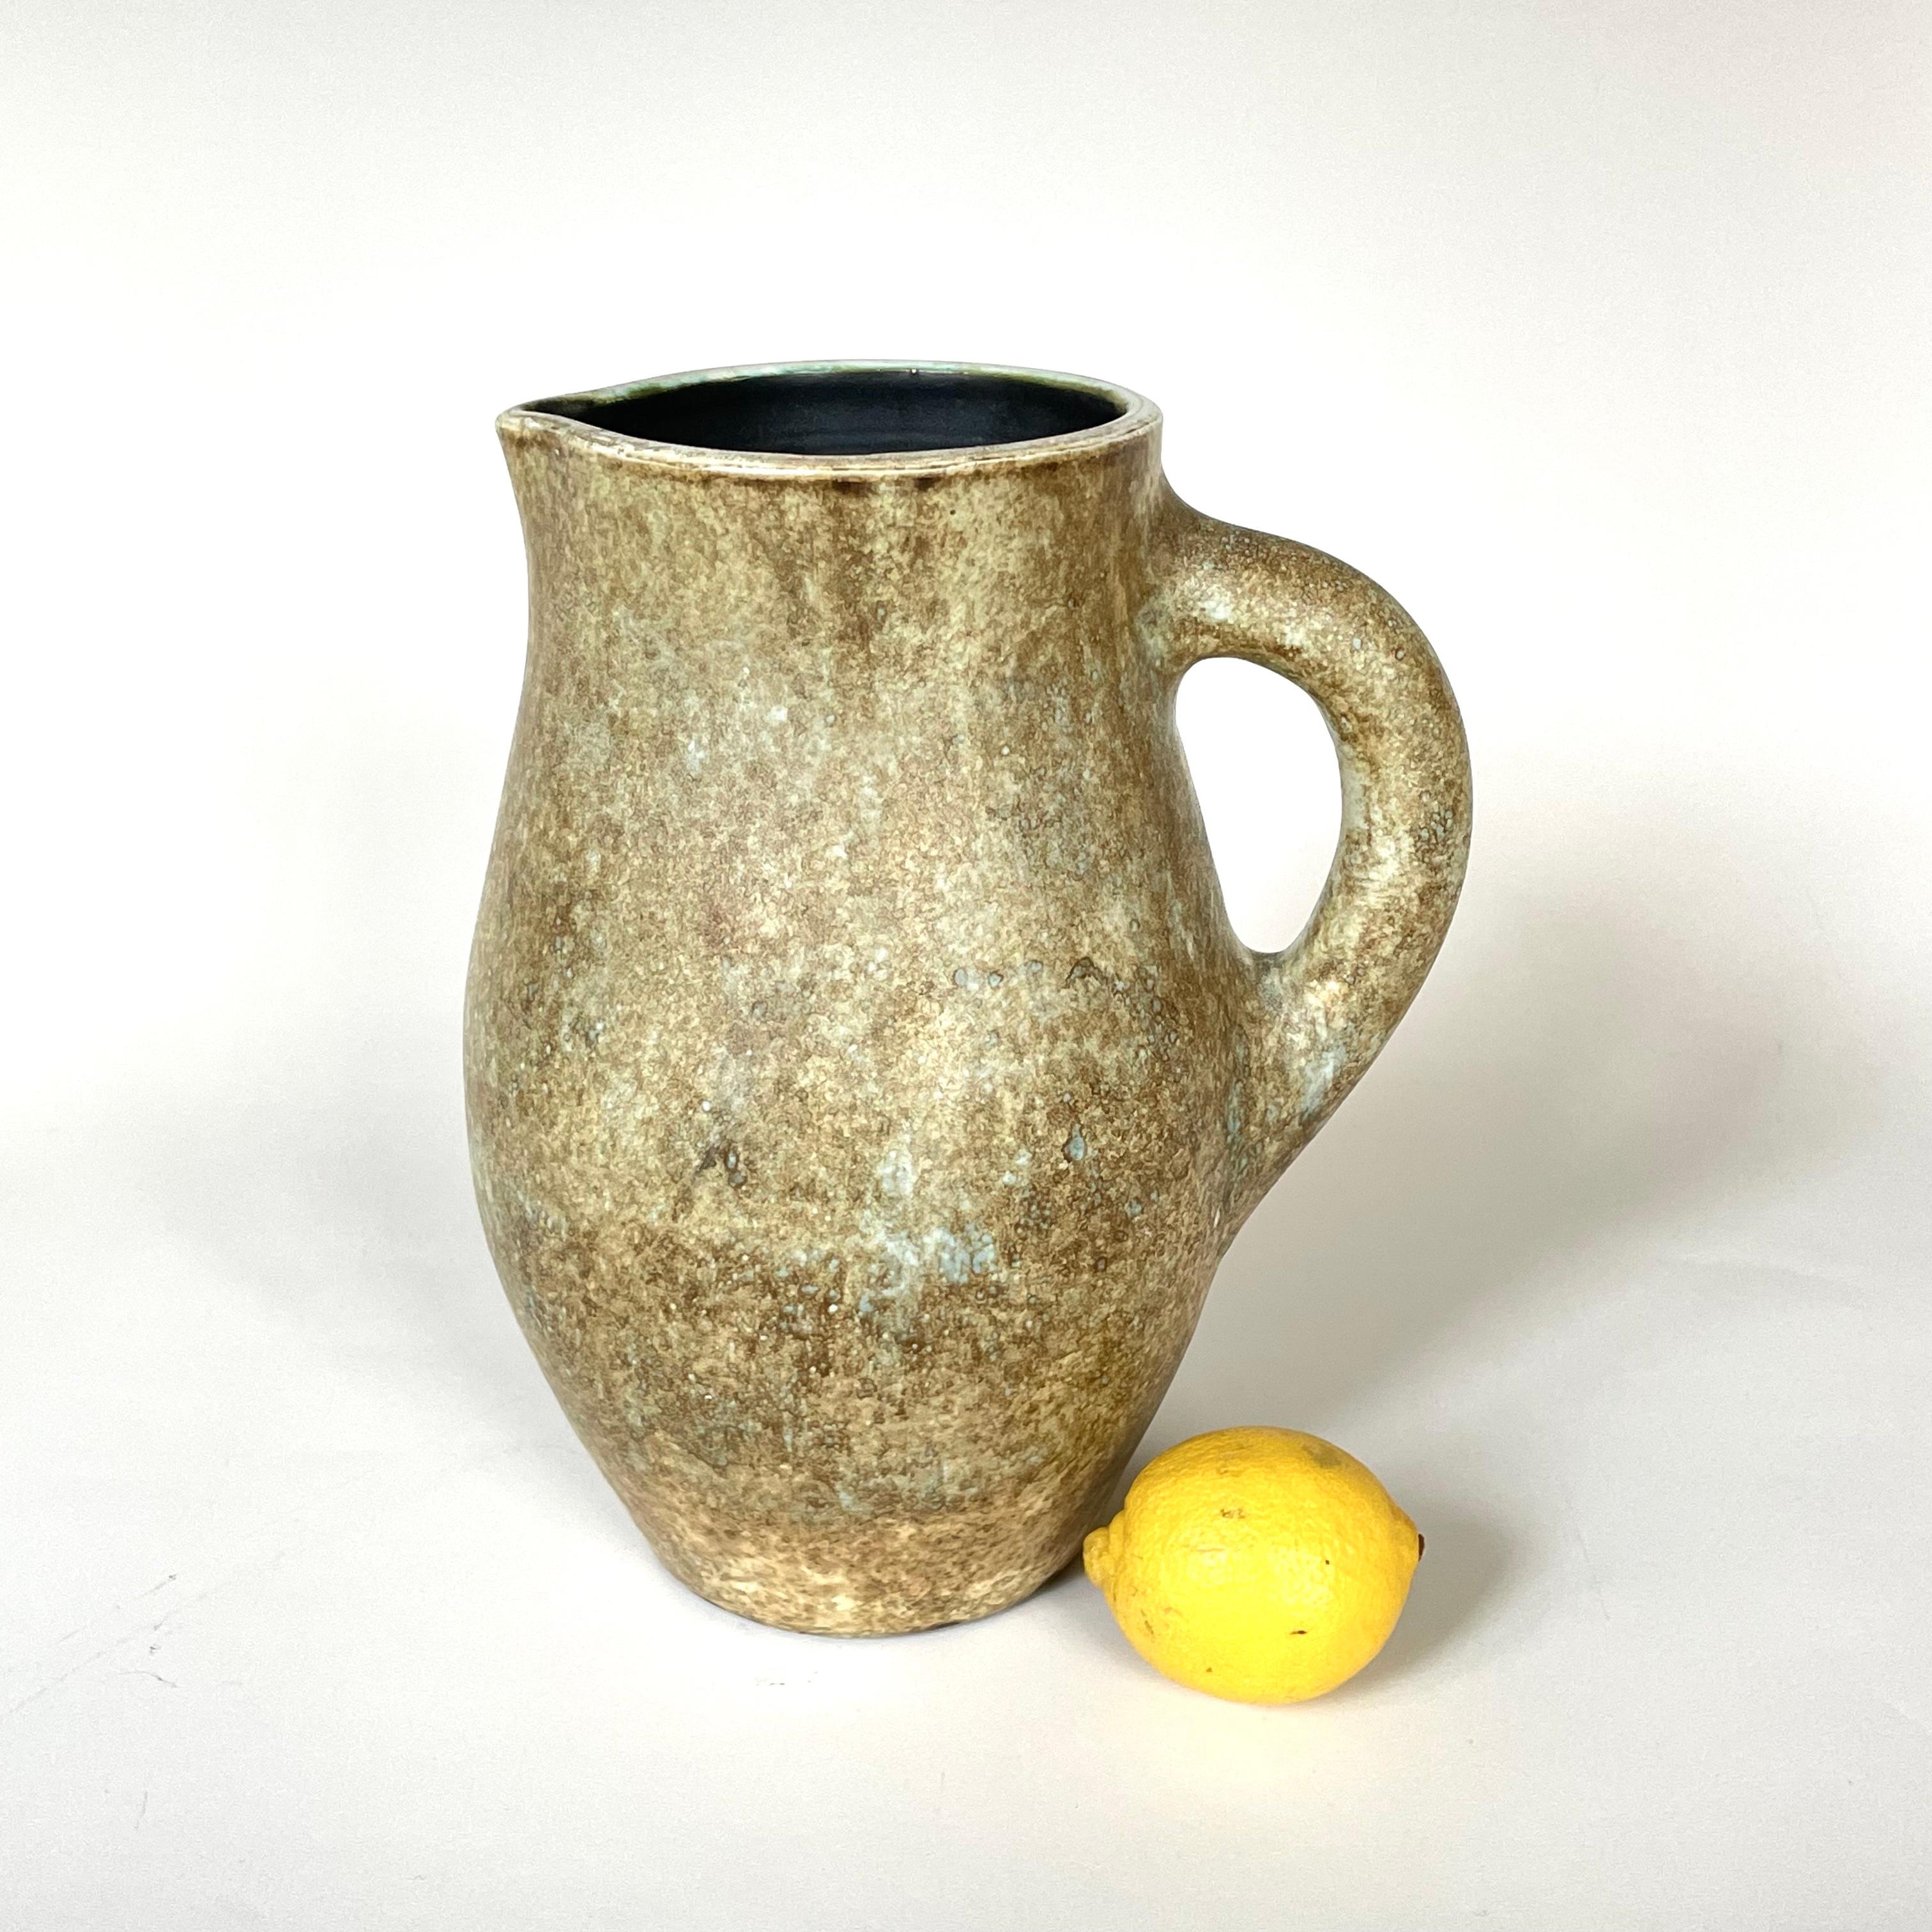 Ceramic pitcher by Jacques and Michelle Serre, Les 2 potiers, circa 1950 1